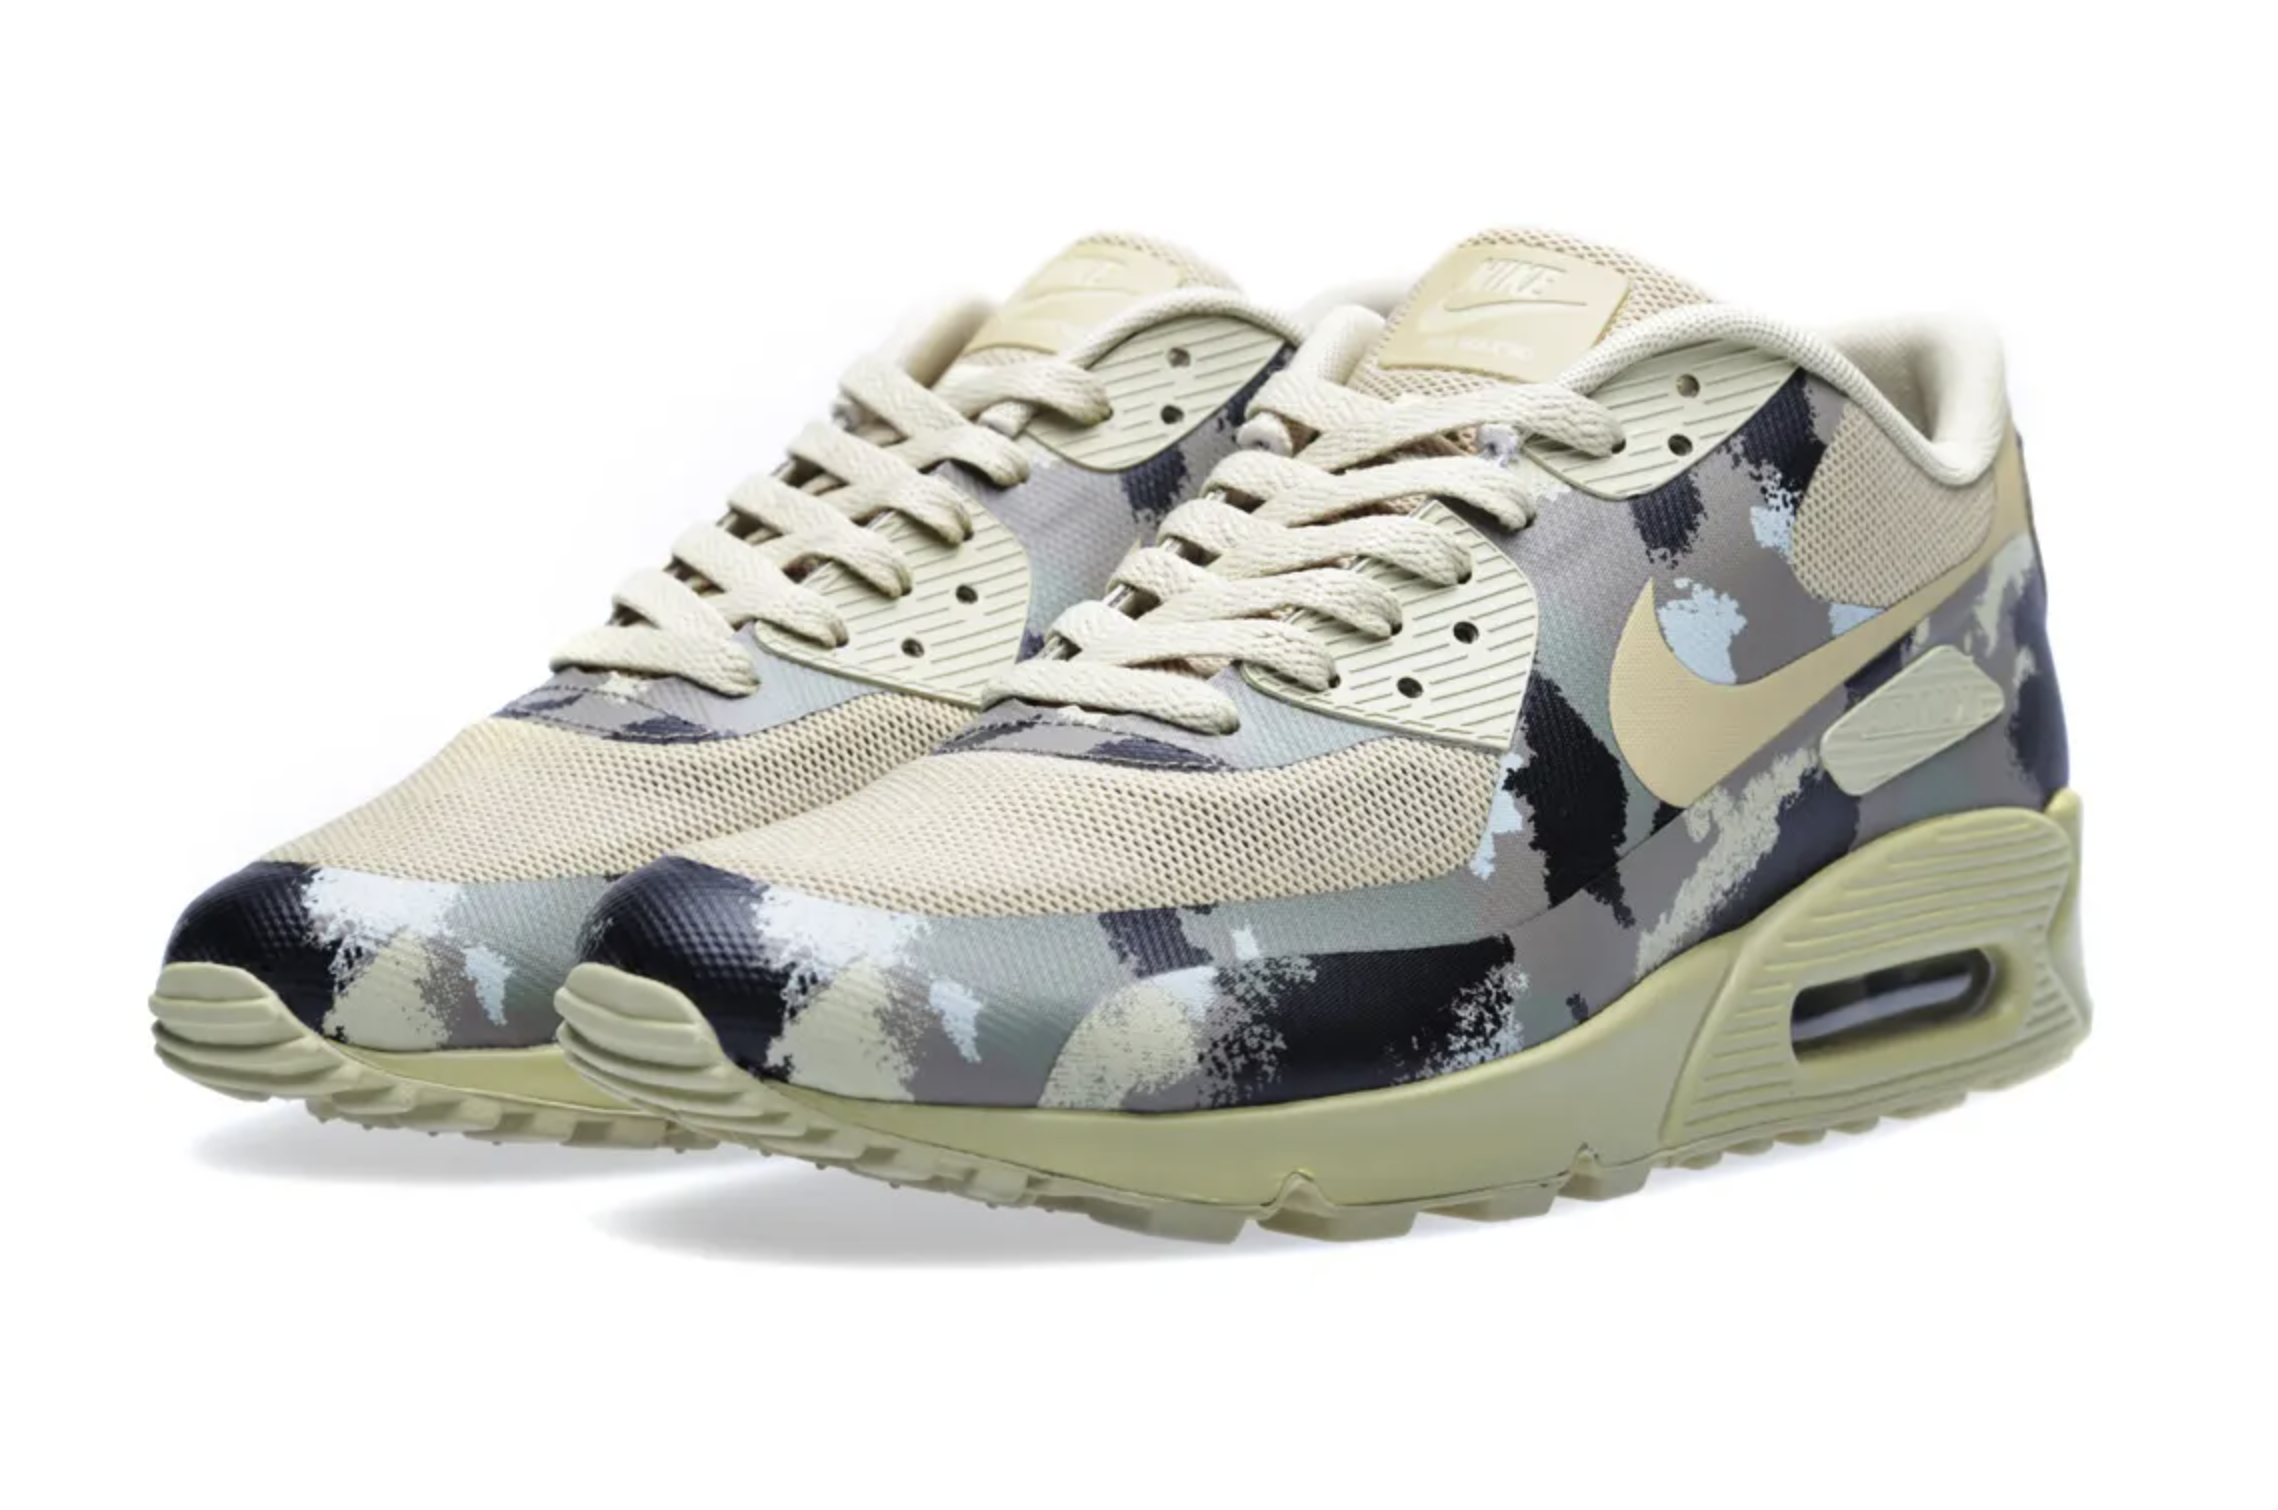 Nike Air Max 90 Country Camo Italy (2013)